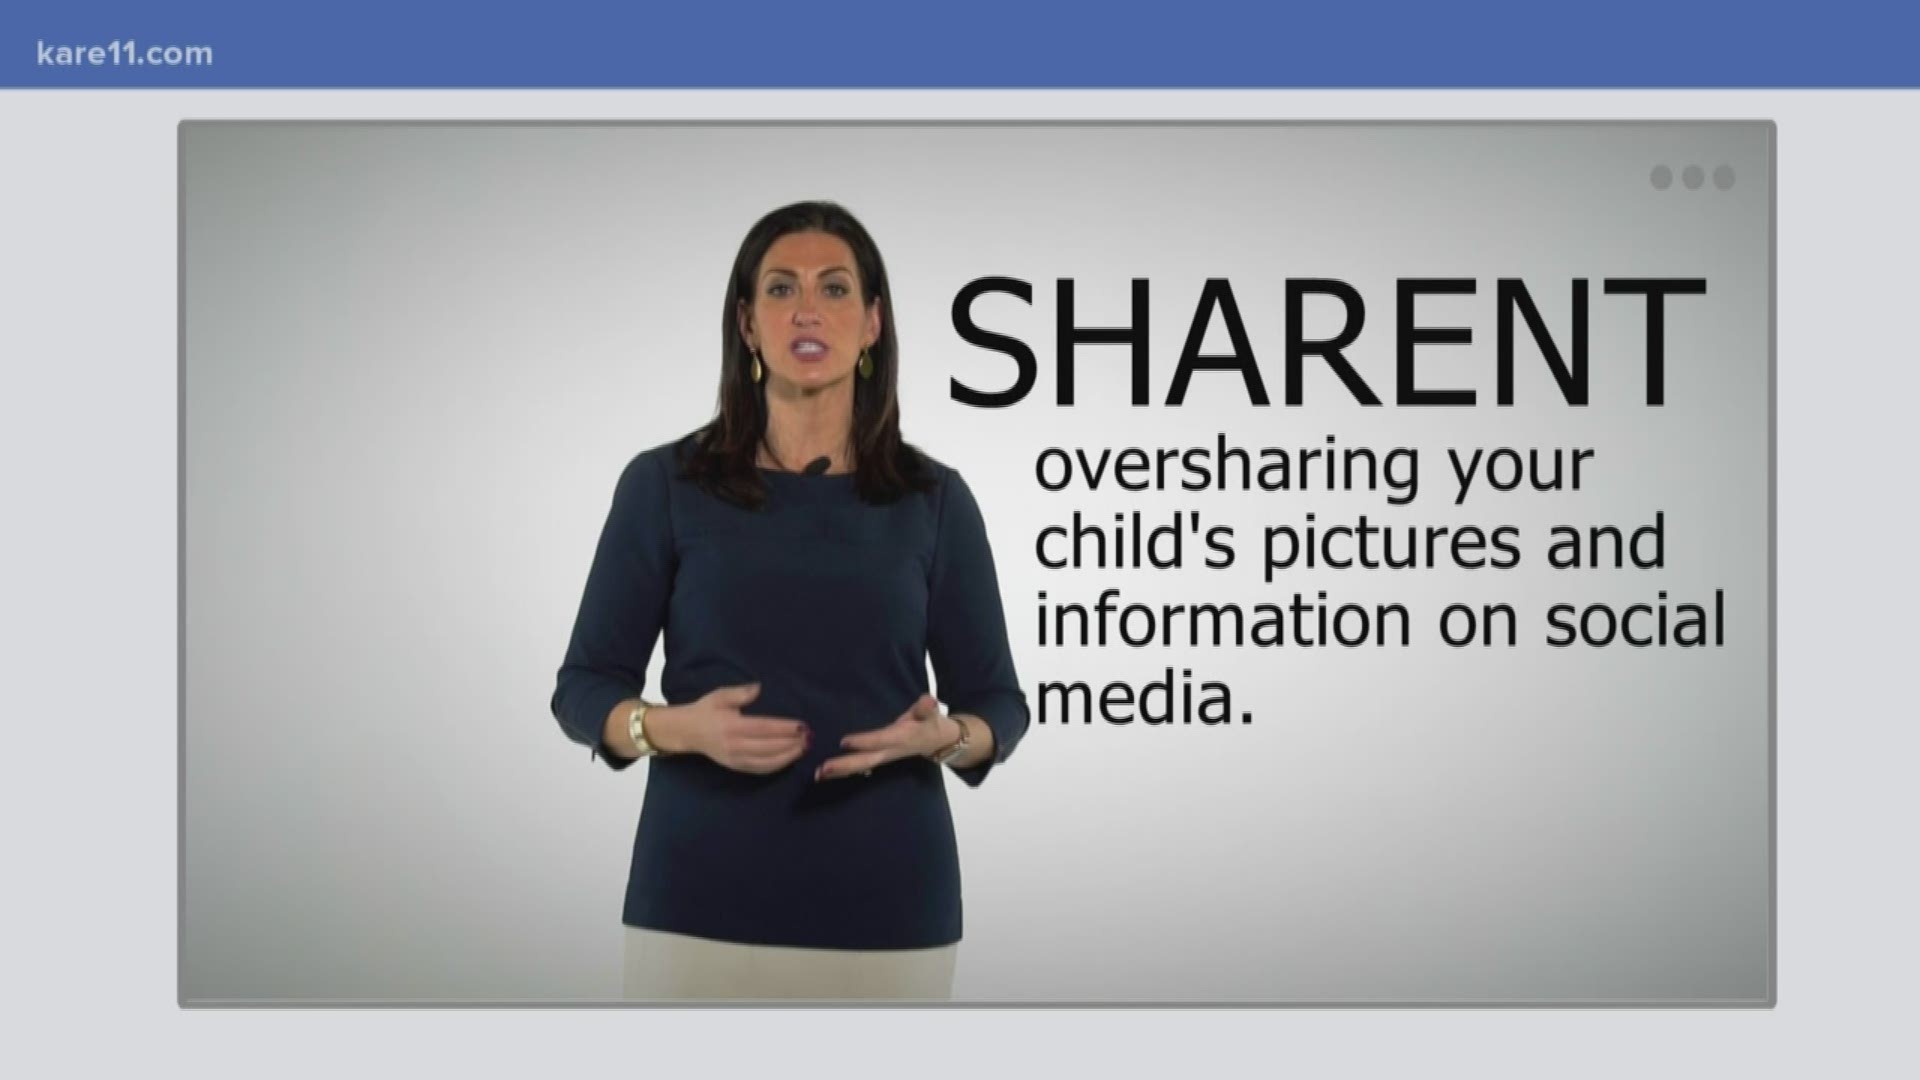 Do you sharent? It’s that thing where you share pictures and information about your kids on social media.